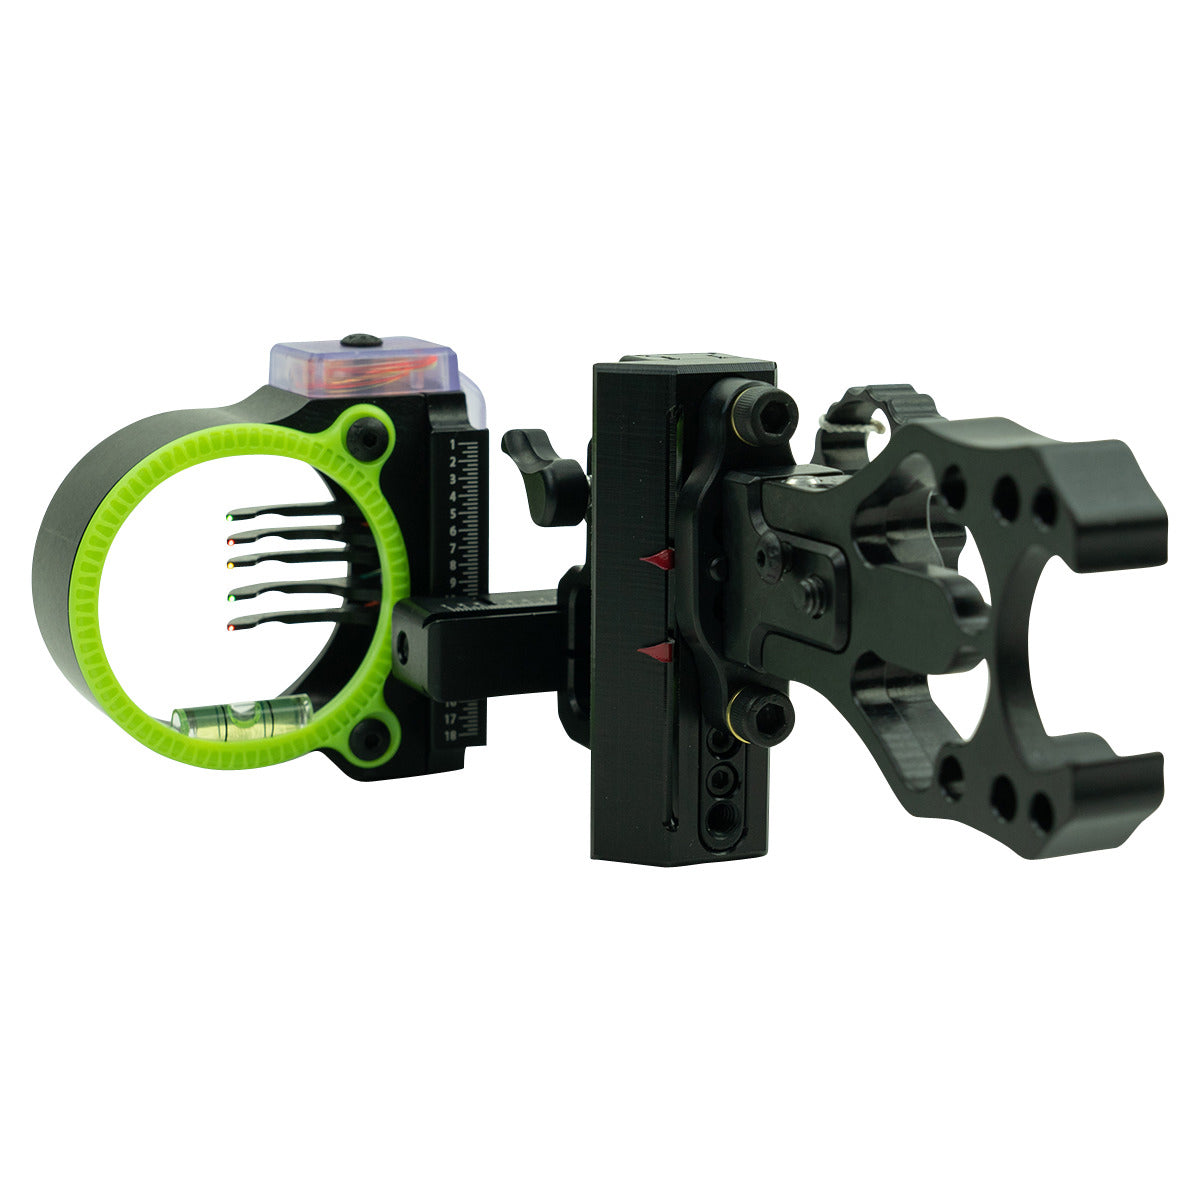 Black Gold Ascent Mountain Lite 5 Pin Bow Sight by Black Gold | Archery - goHUNT Shop